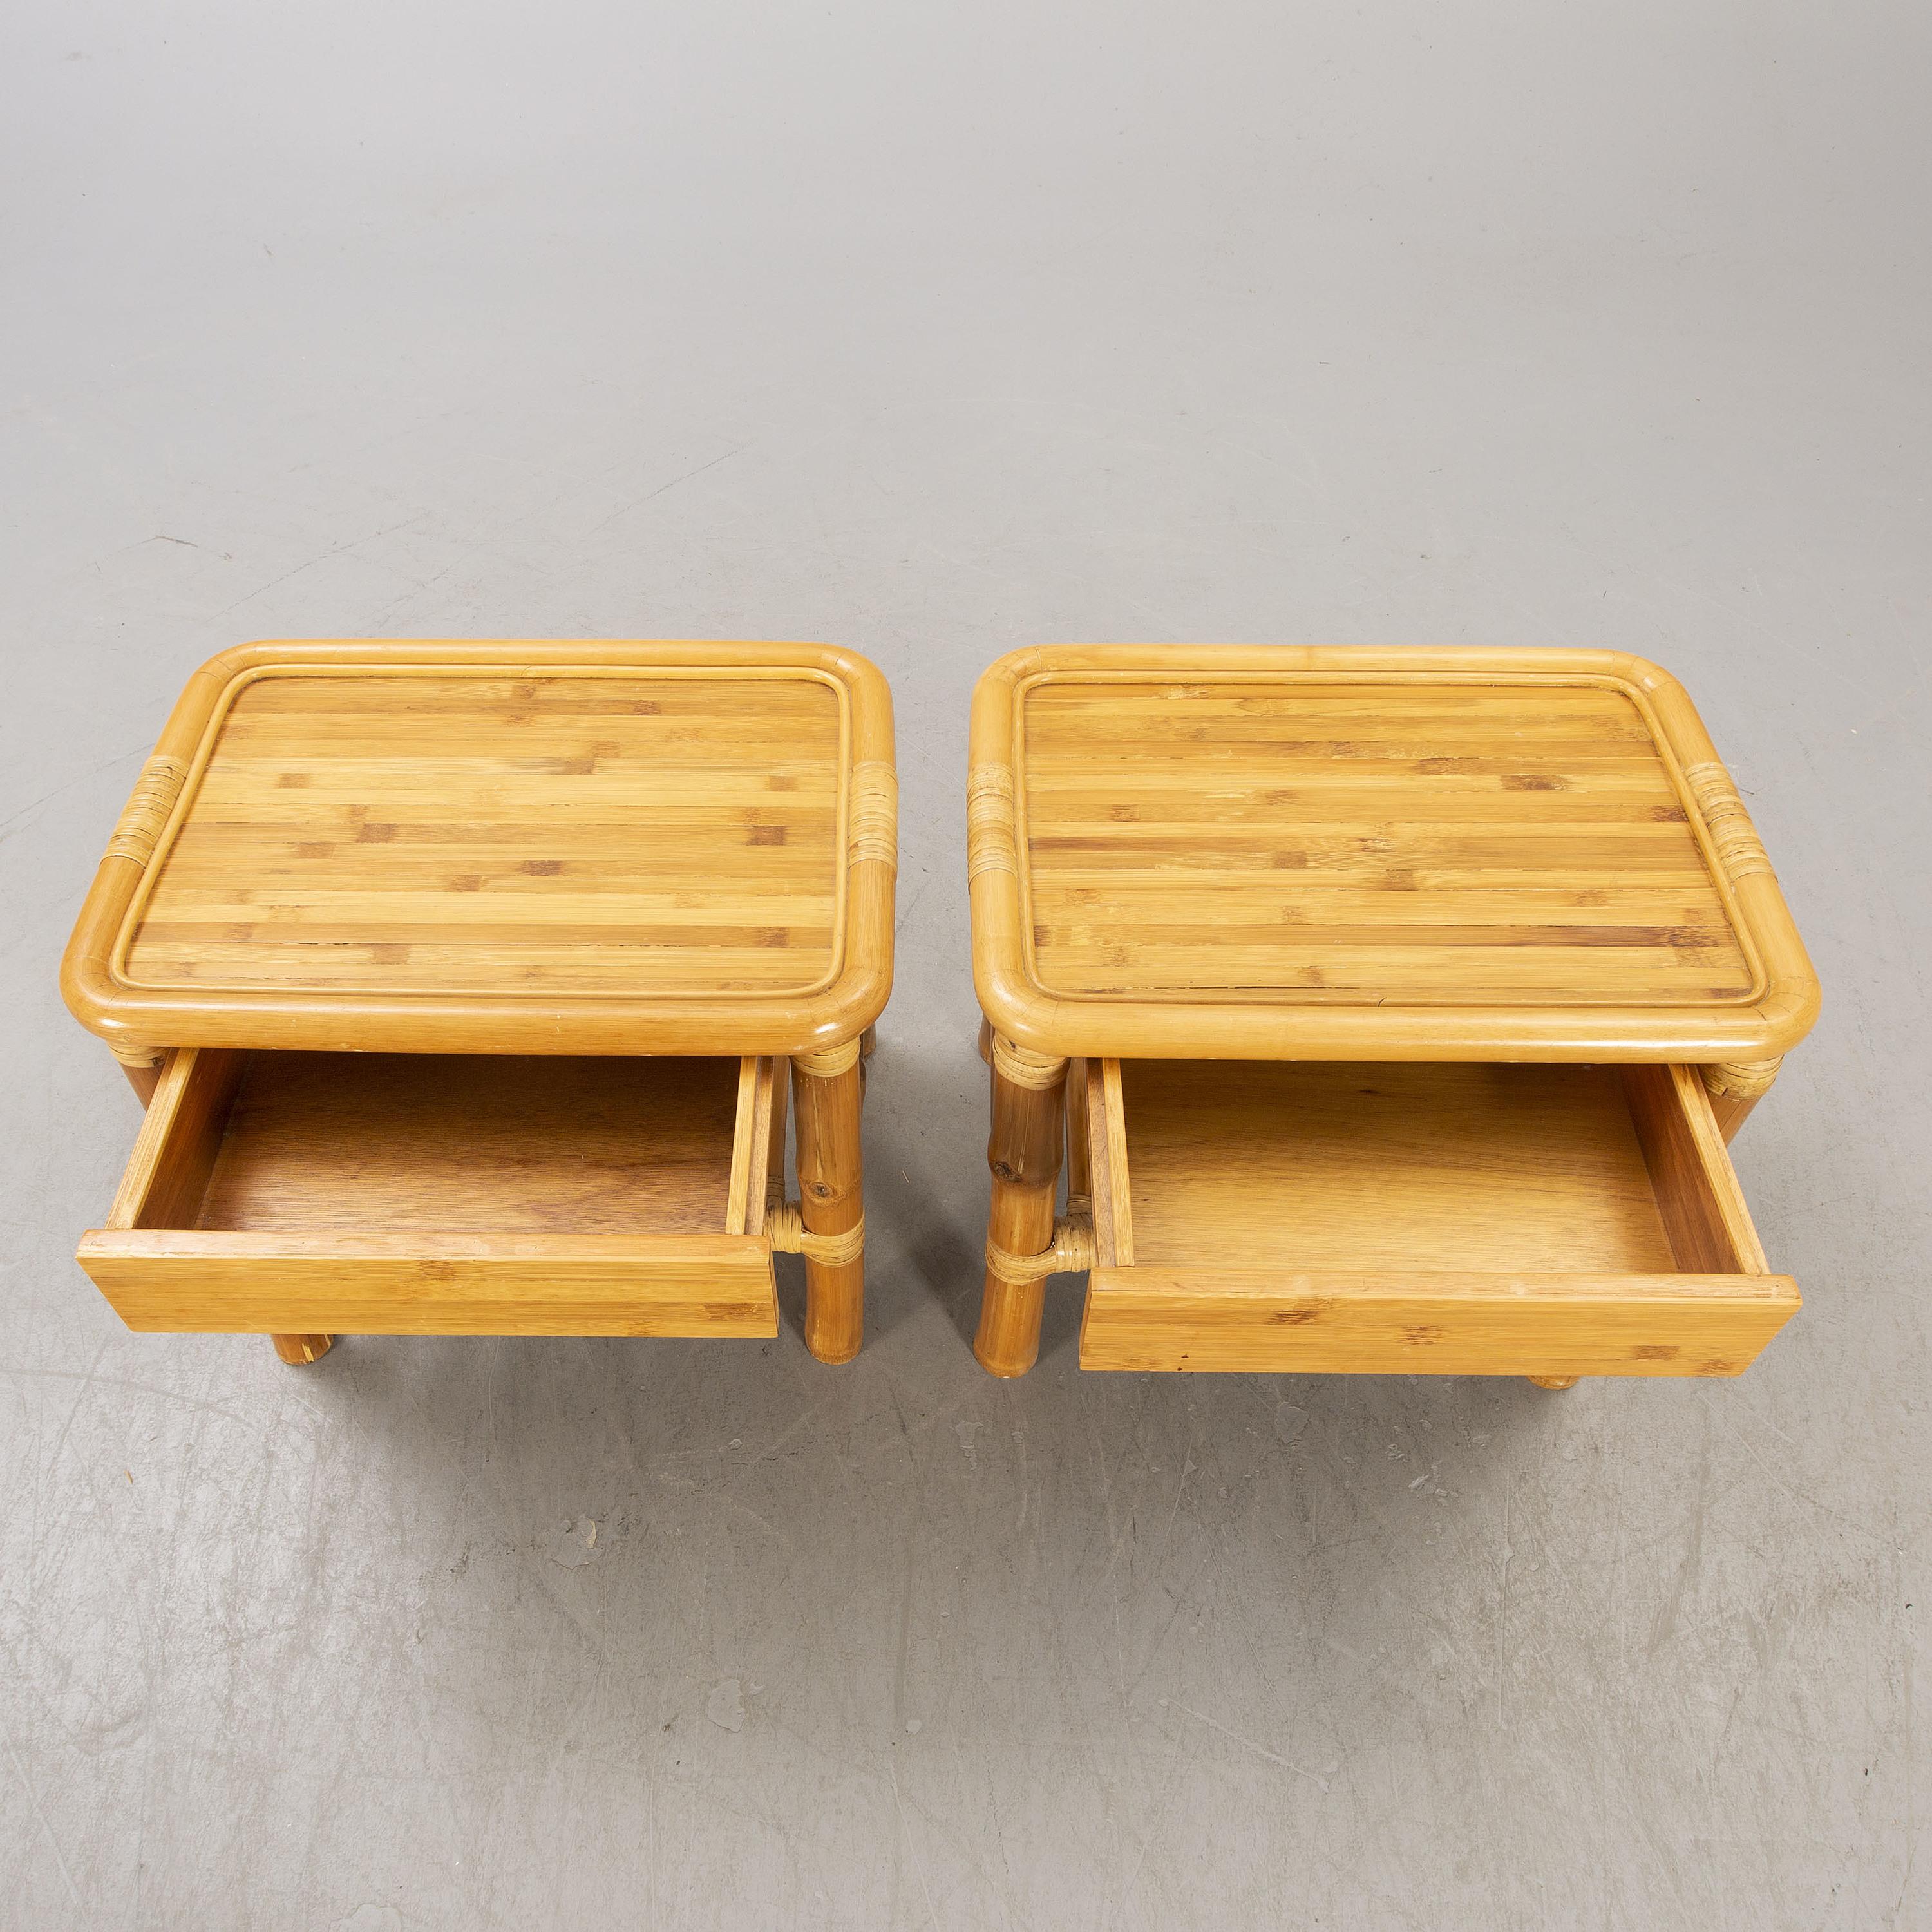 Swedish Bamboo and Wood Tables a Pair Probably by DUX, Sweden, 1960 For Sale